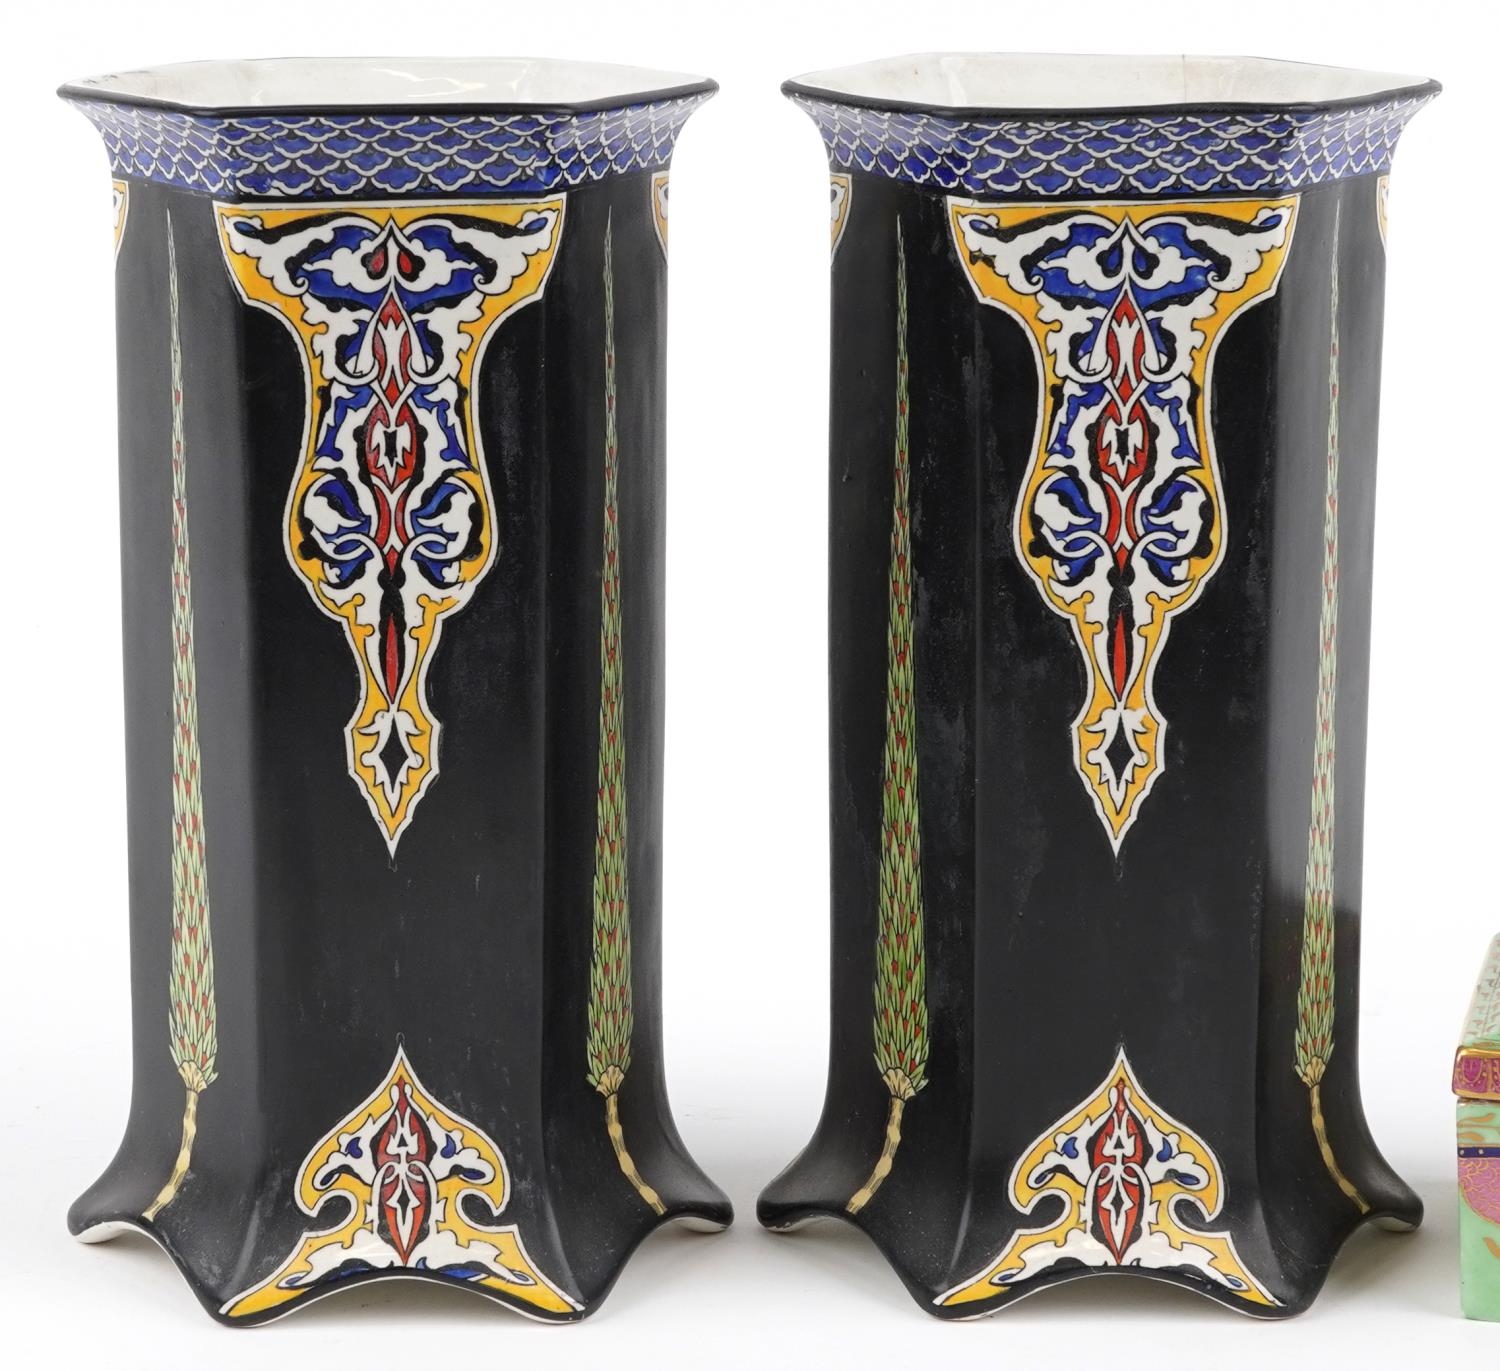 Pair of Art Nouveau hexagonal vases decorated with foliate motifs and a 1930s square box and cover - Image 2 of 5